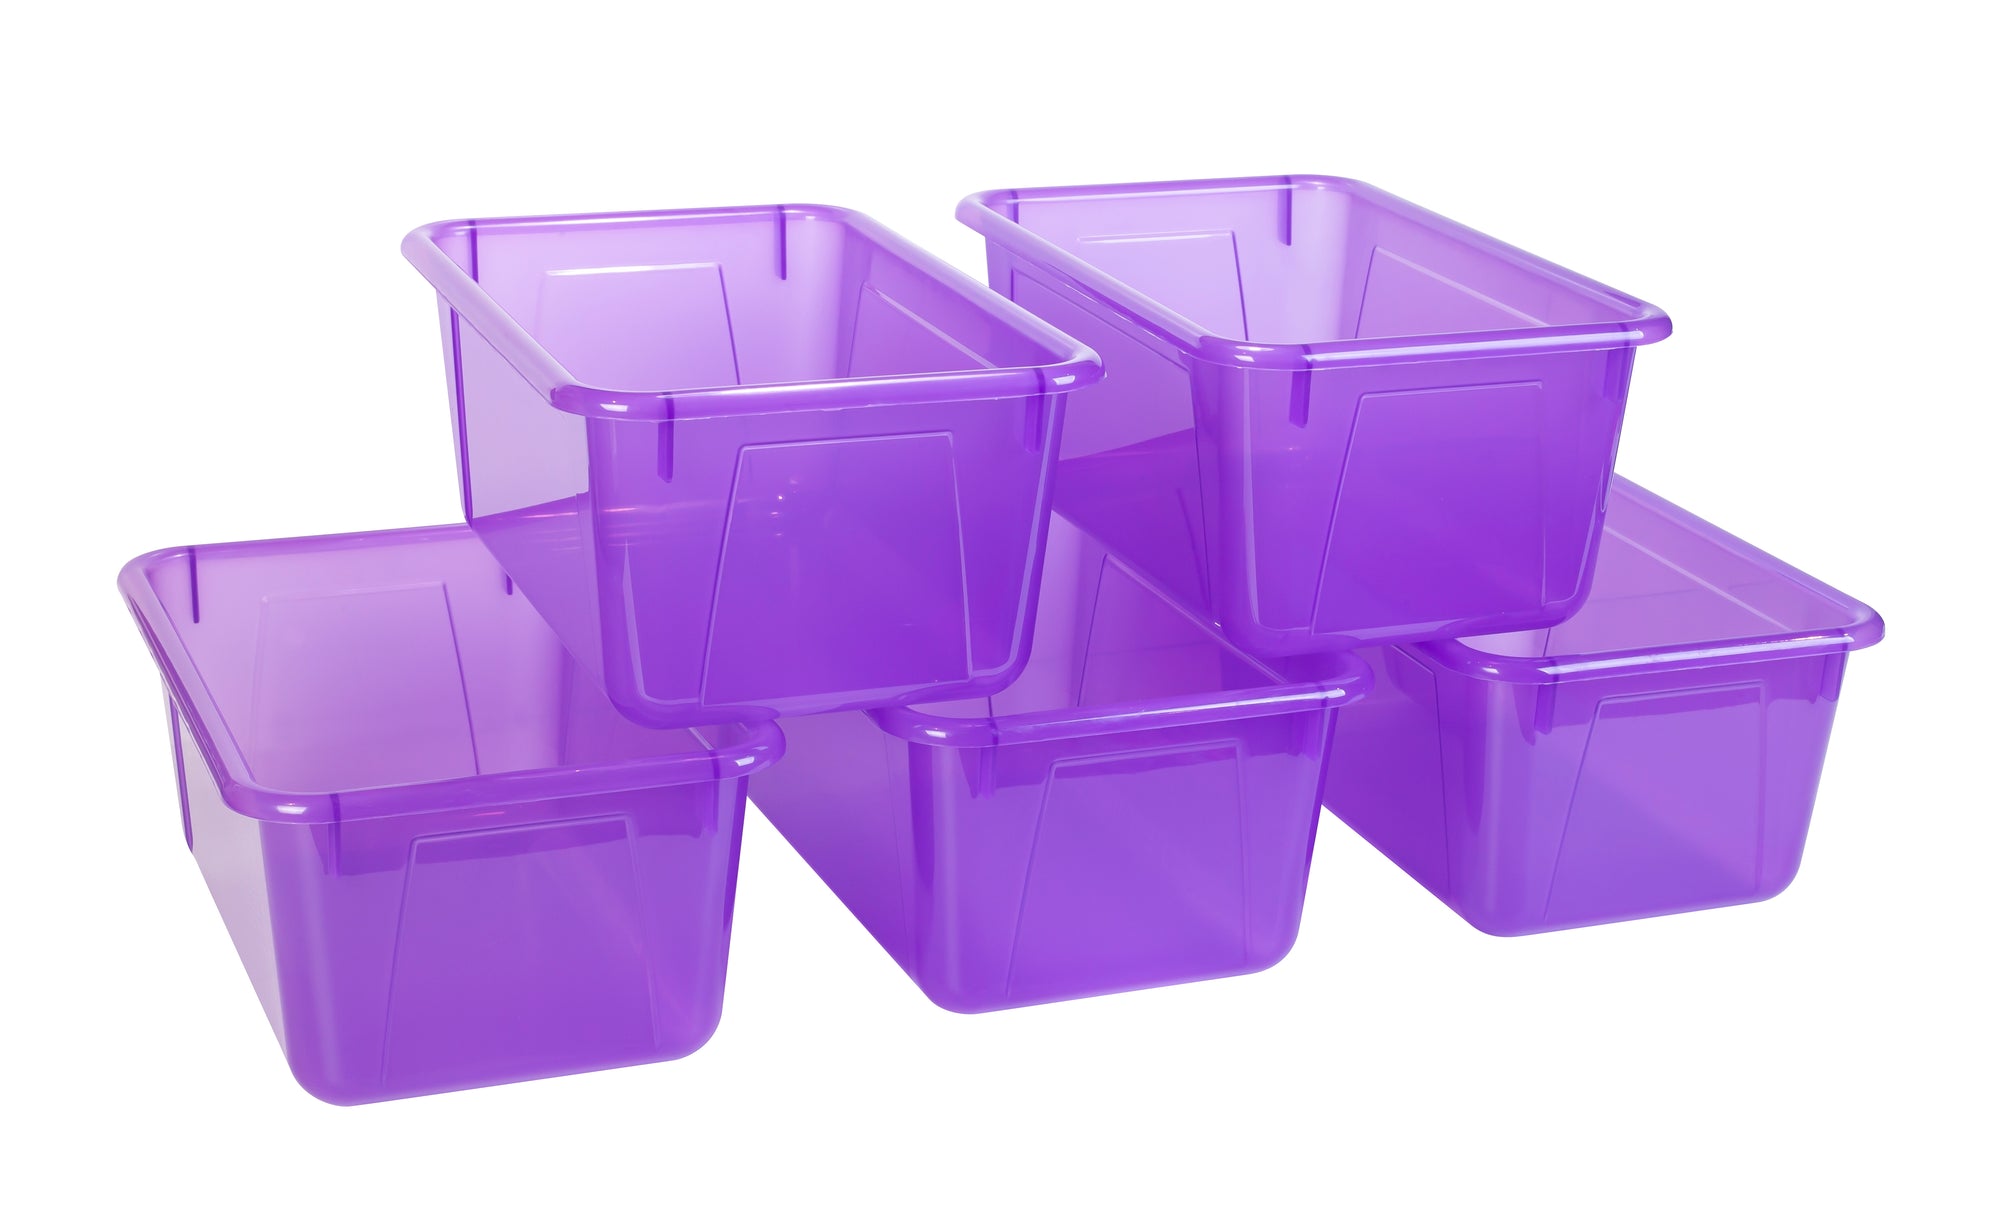 Storex Small Cubby Bin, Candy Violet, 5-Pack